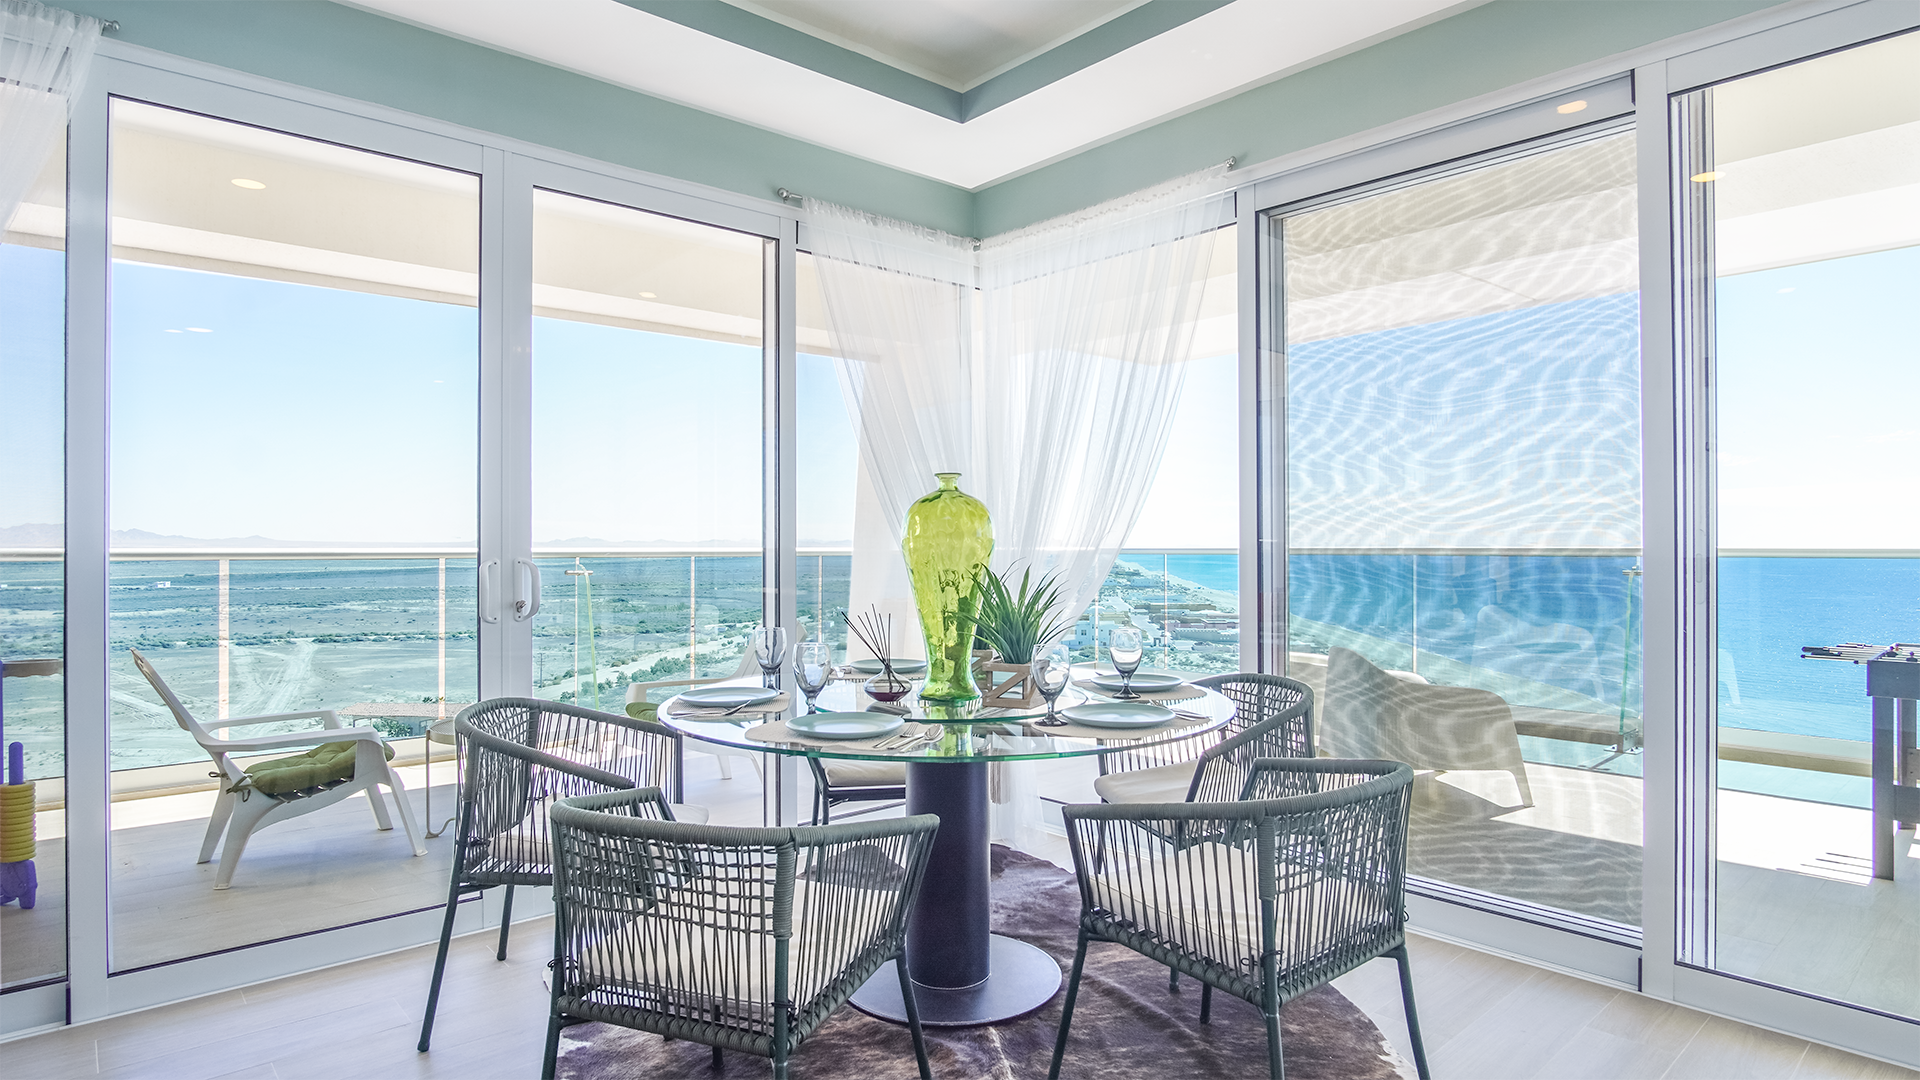 Where all of the windows come together, the glass dining table commands excellent views.